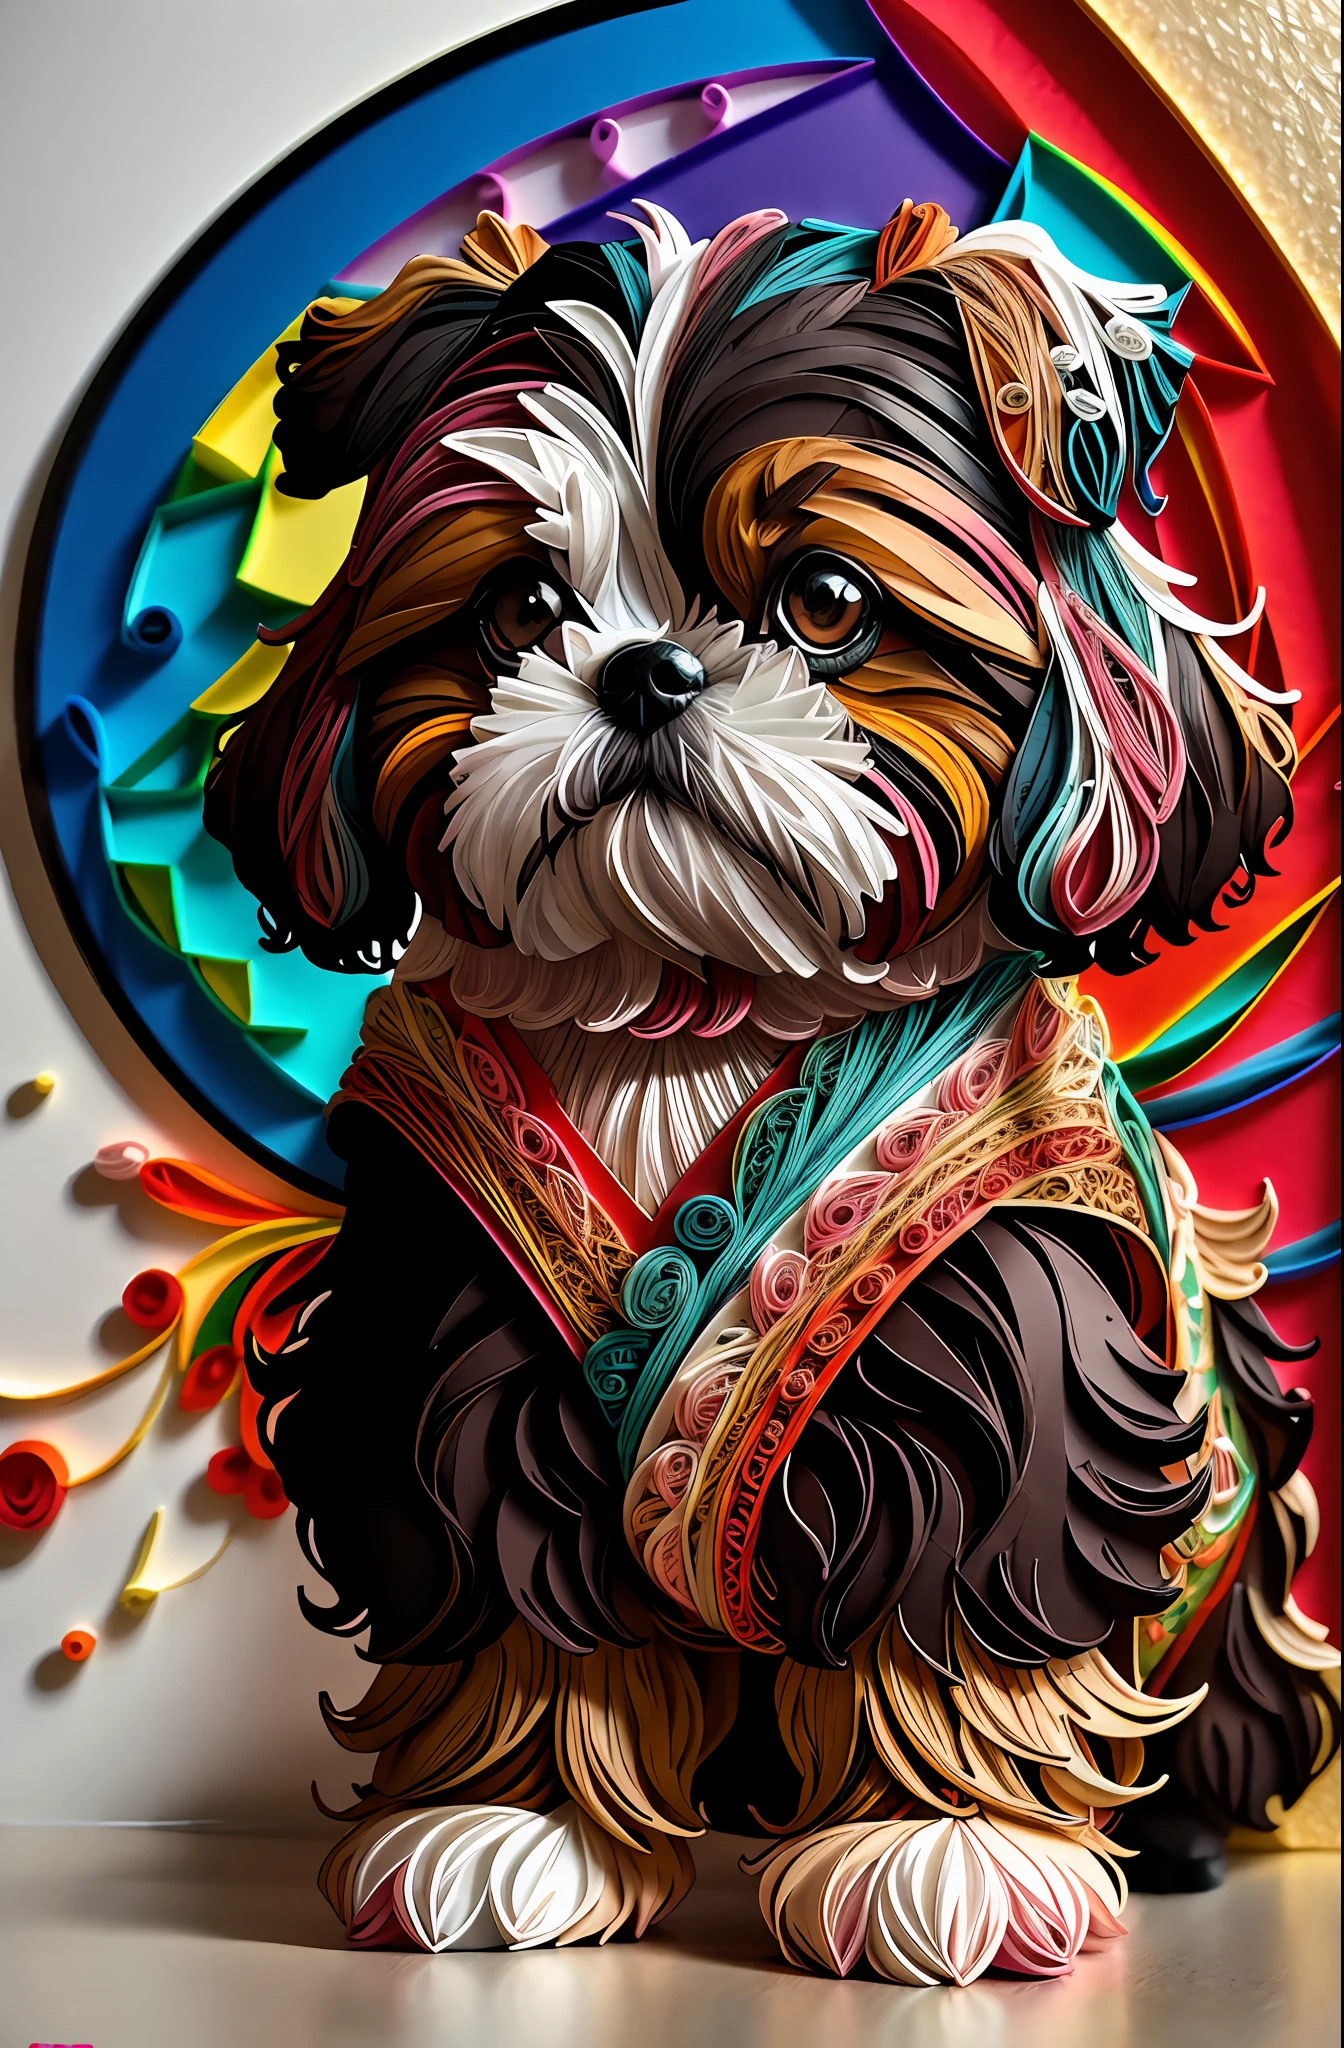 Masterpieces, top quality, best quality), beautiful shih tzu dog, art on multi-dimensional quilling paper, beautiful and colorful aesthetics, yang08k style.